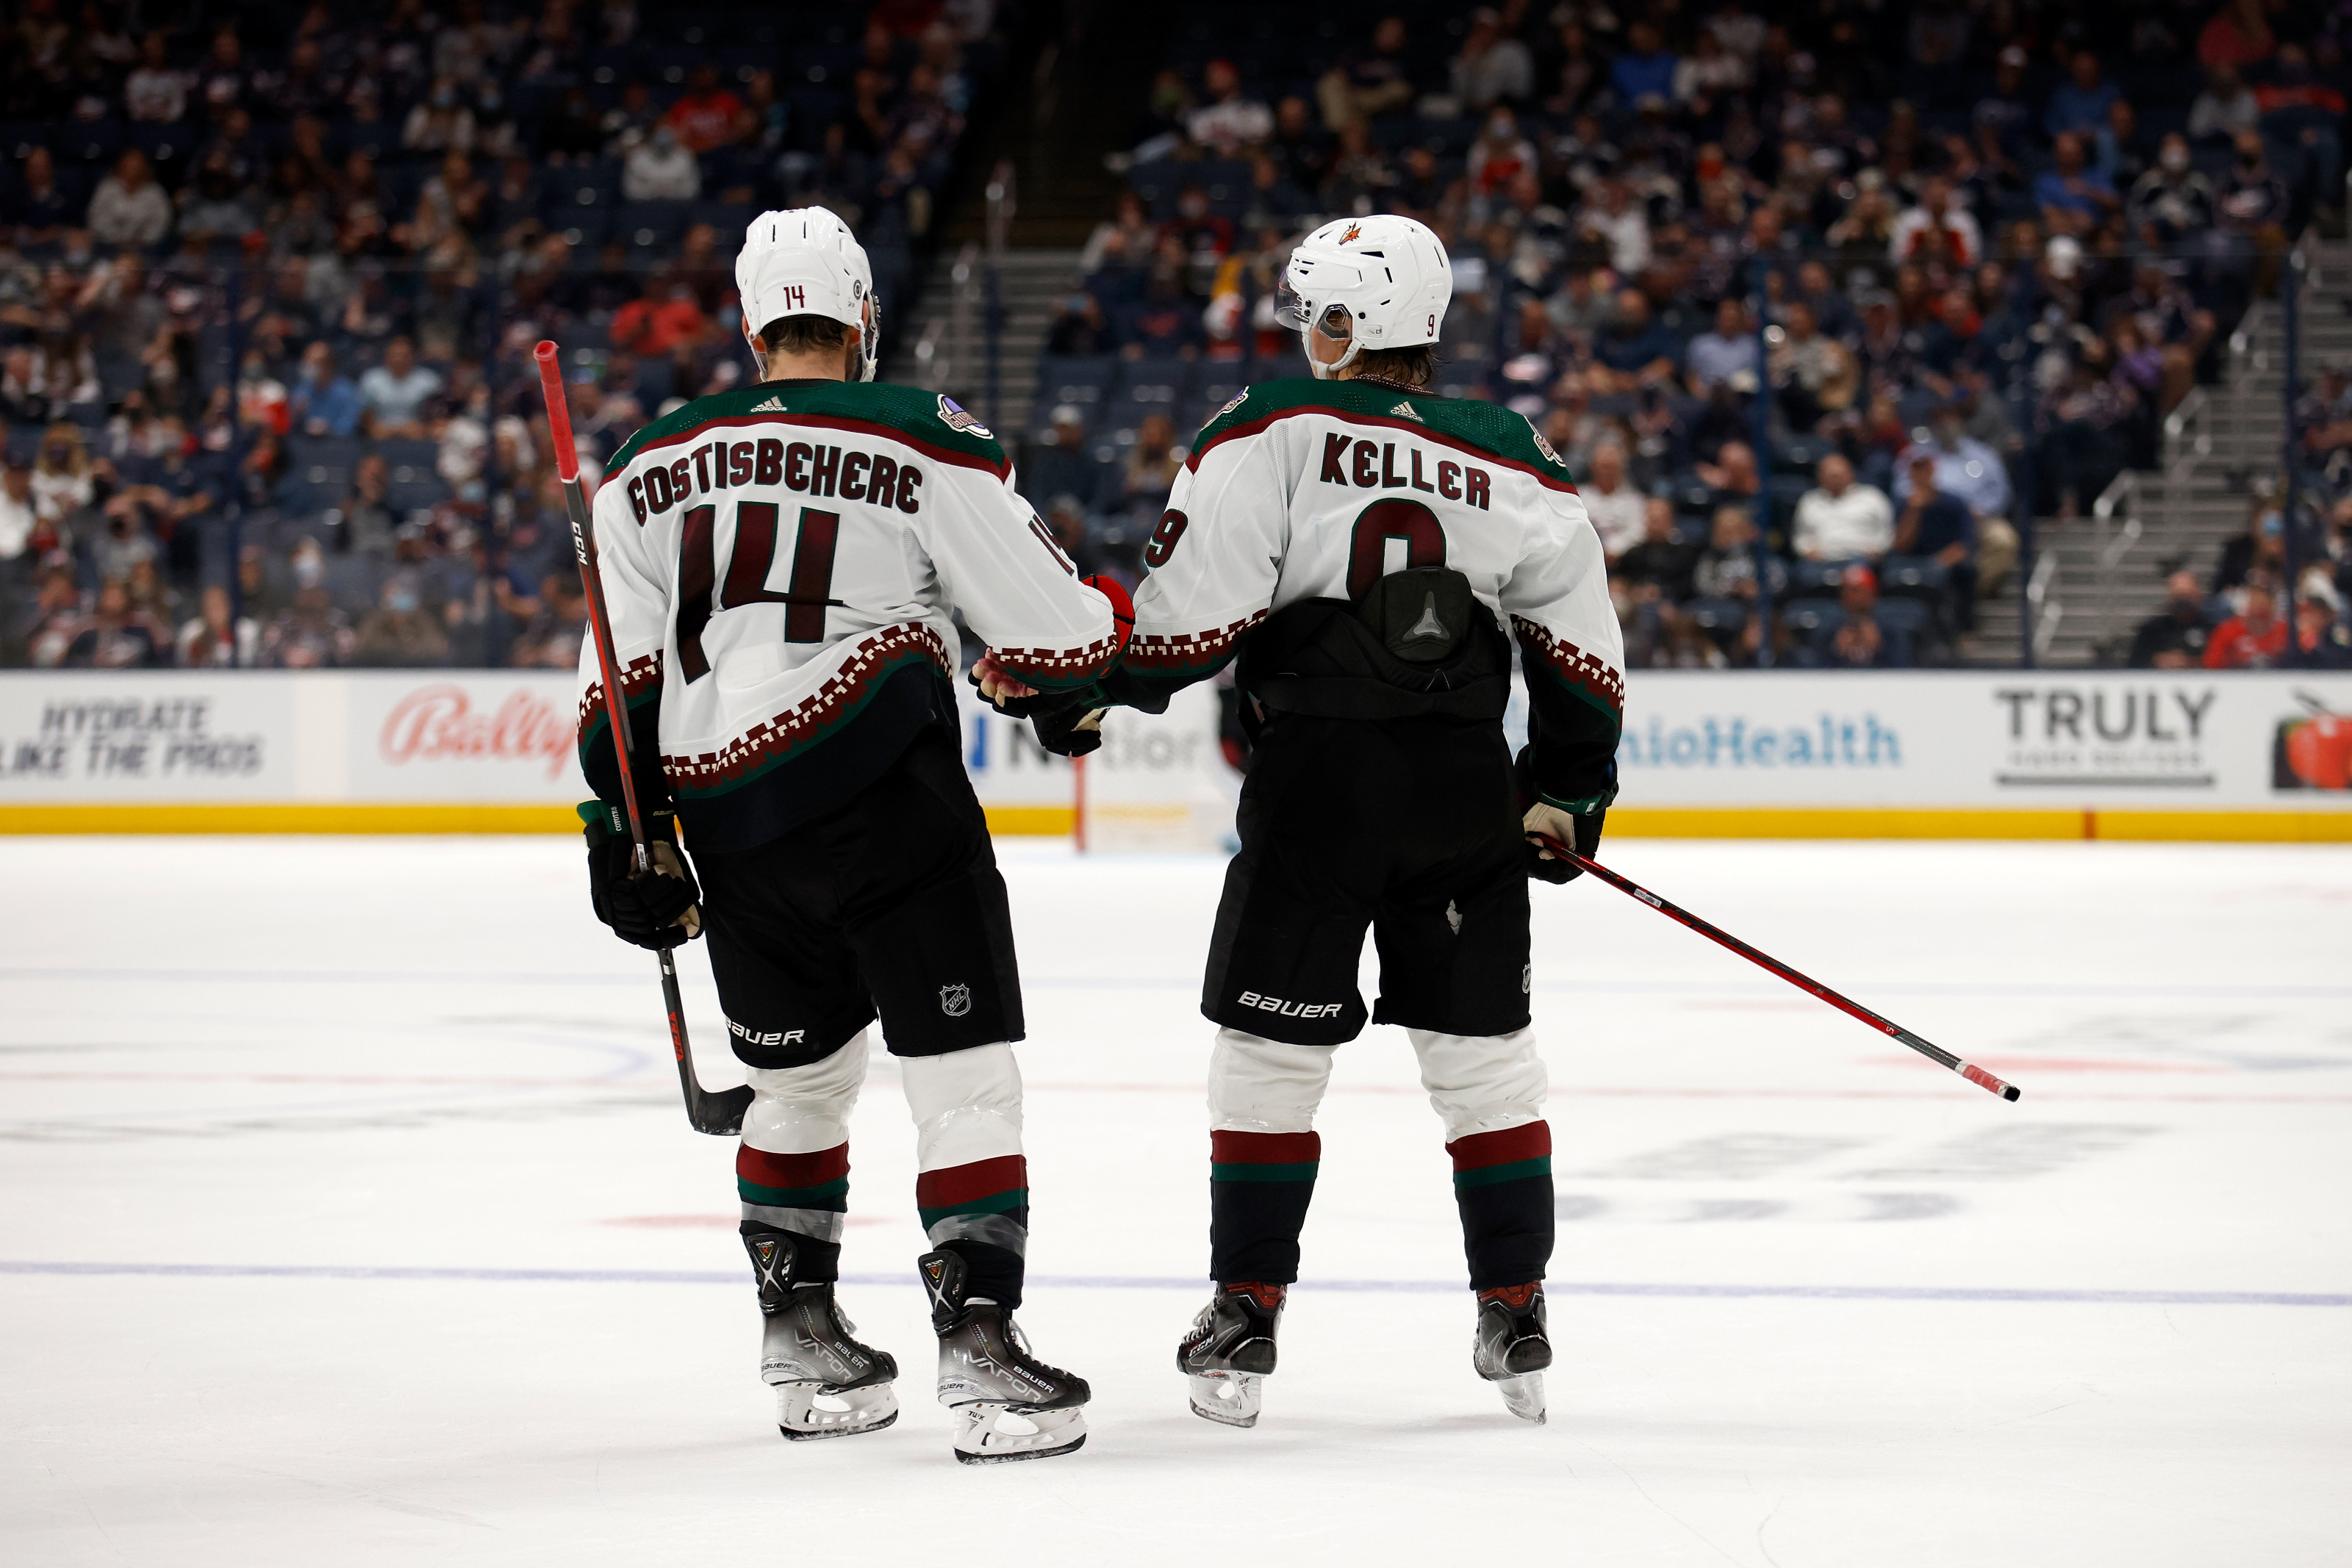 Rookie Clayton Keller a budding star for the Coyotes - Sports Illustrated